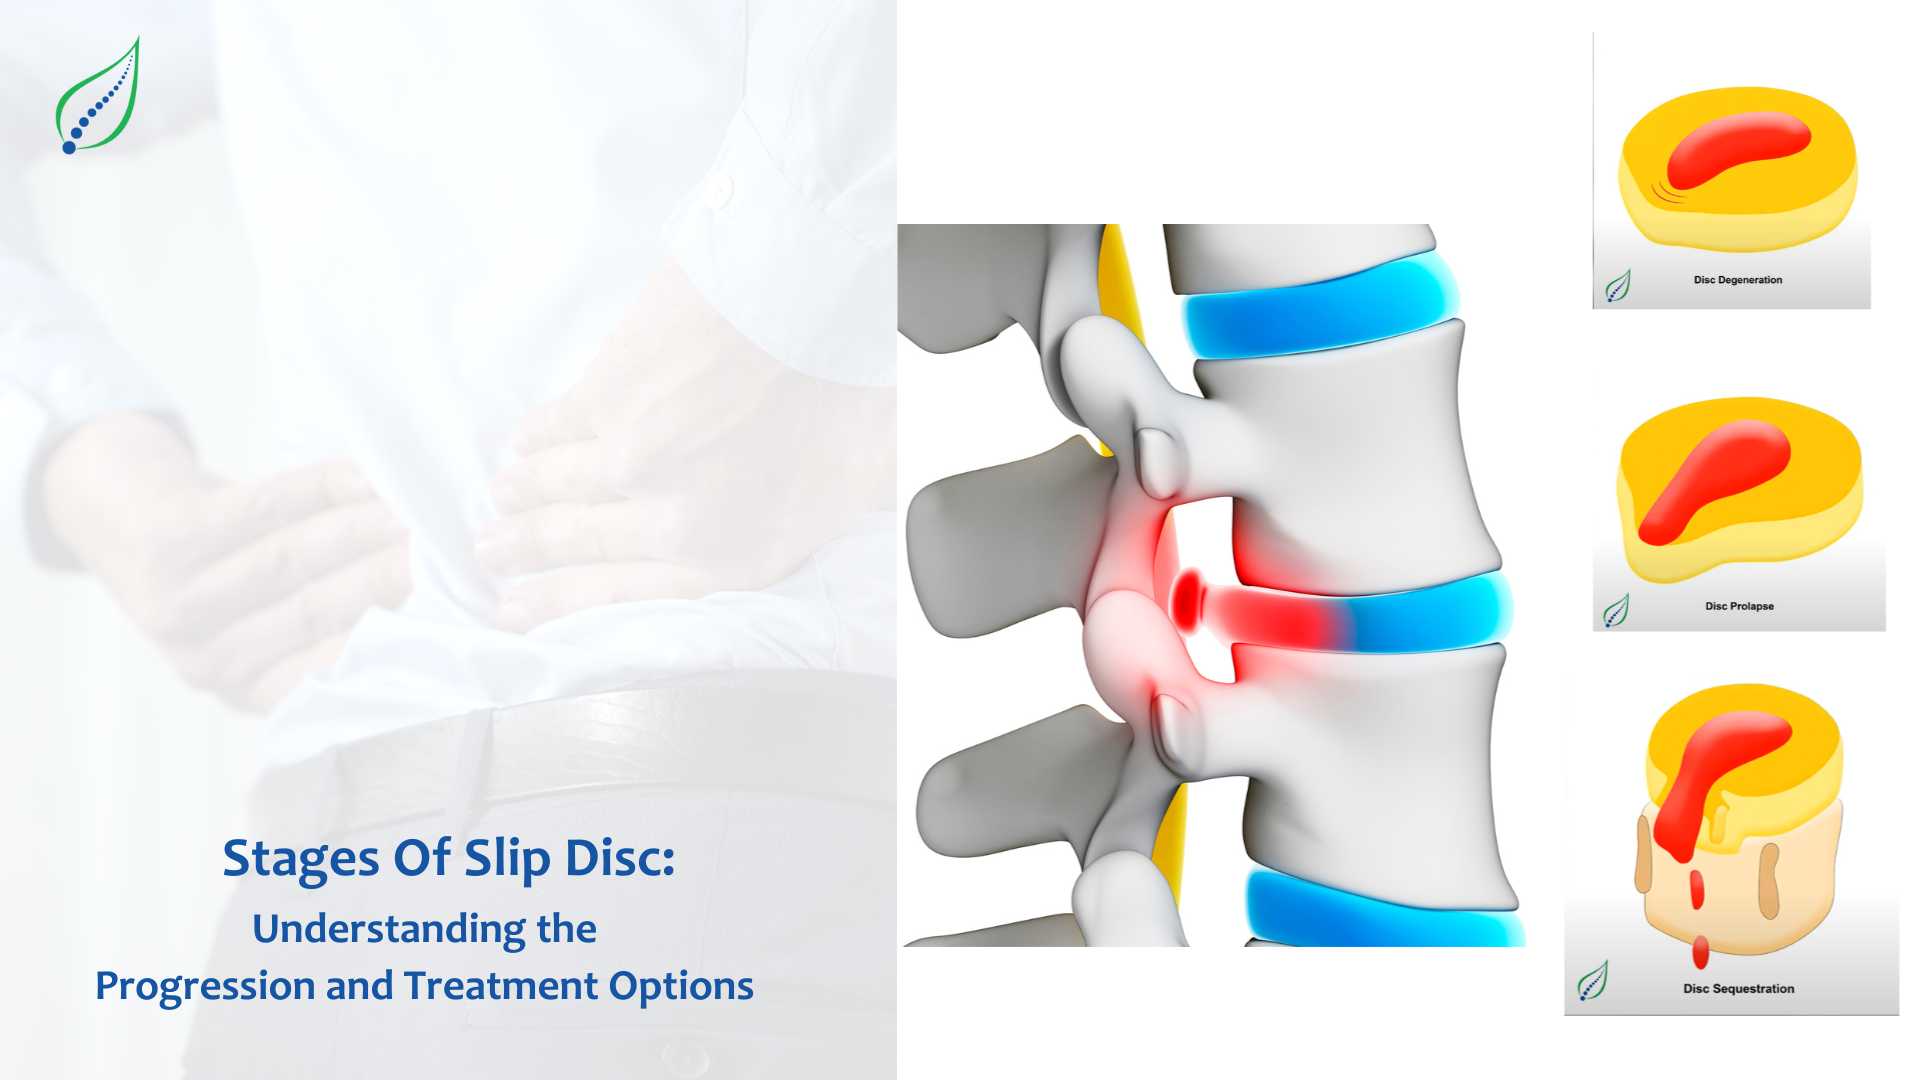 Stages Of Slip Disc: Understanding the Progression and Treatment Options